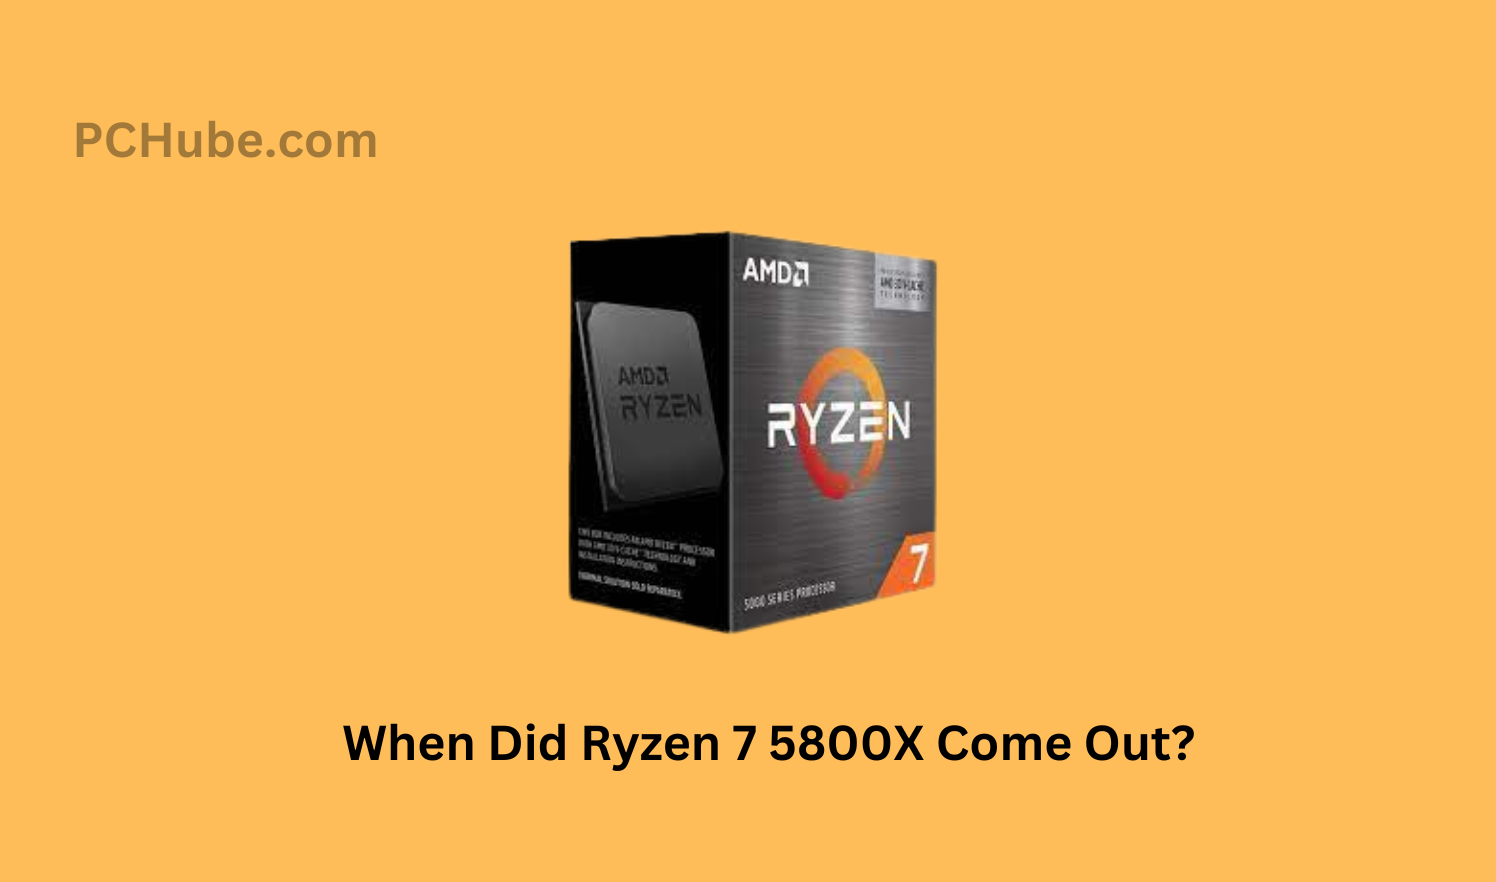 When Did Ryzen 7 5800X Come Out?